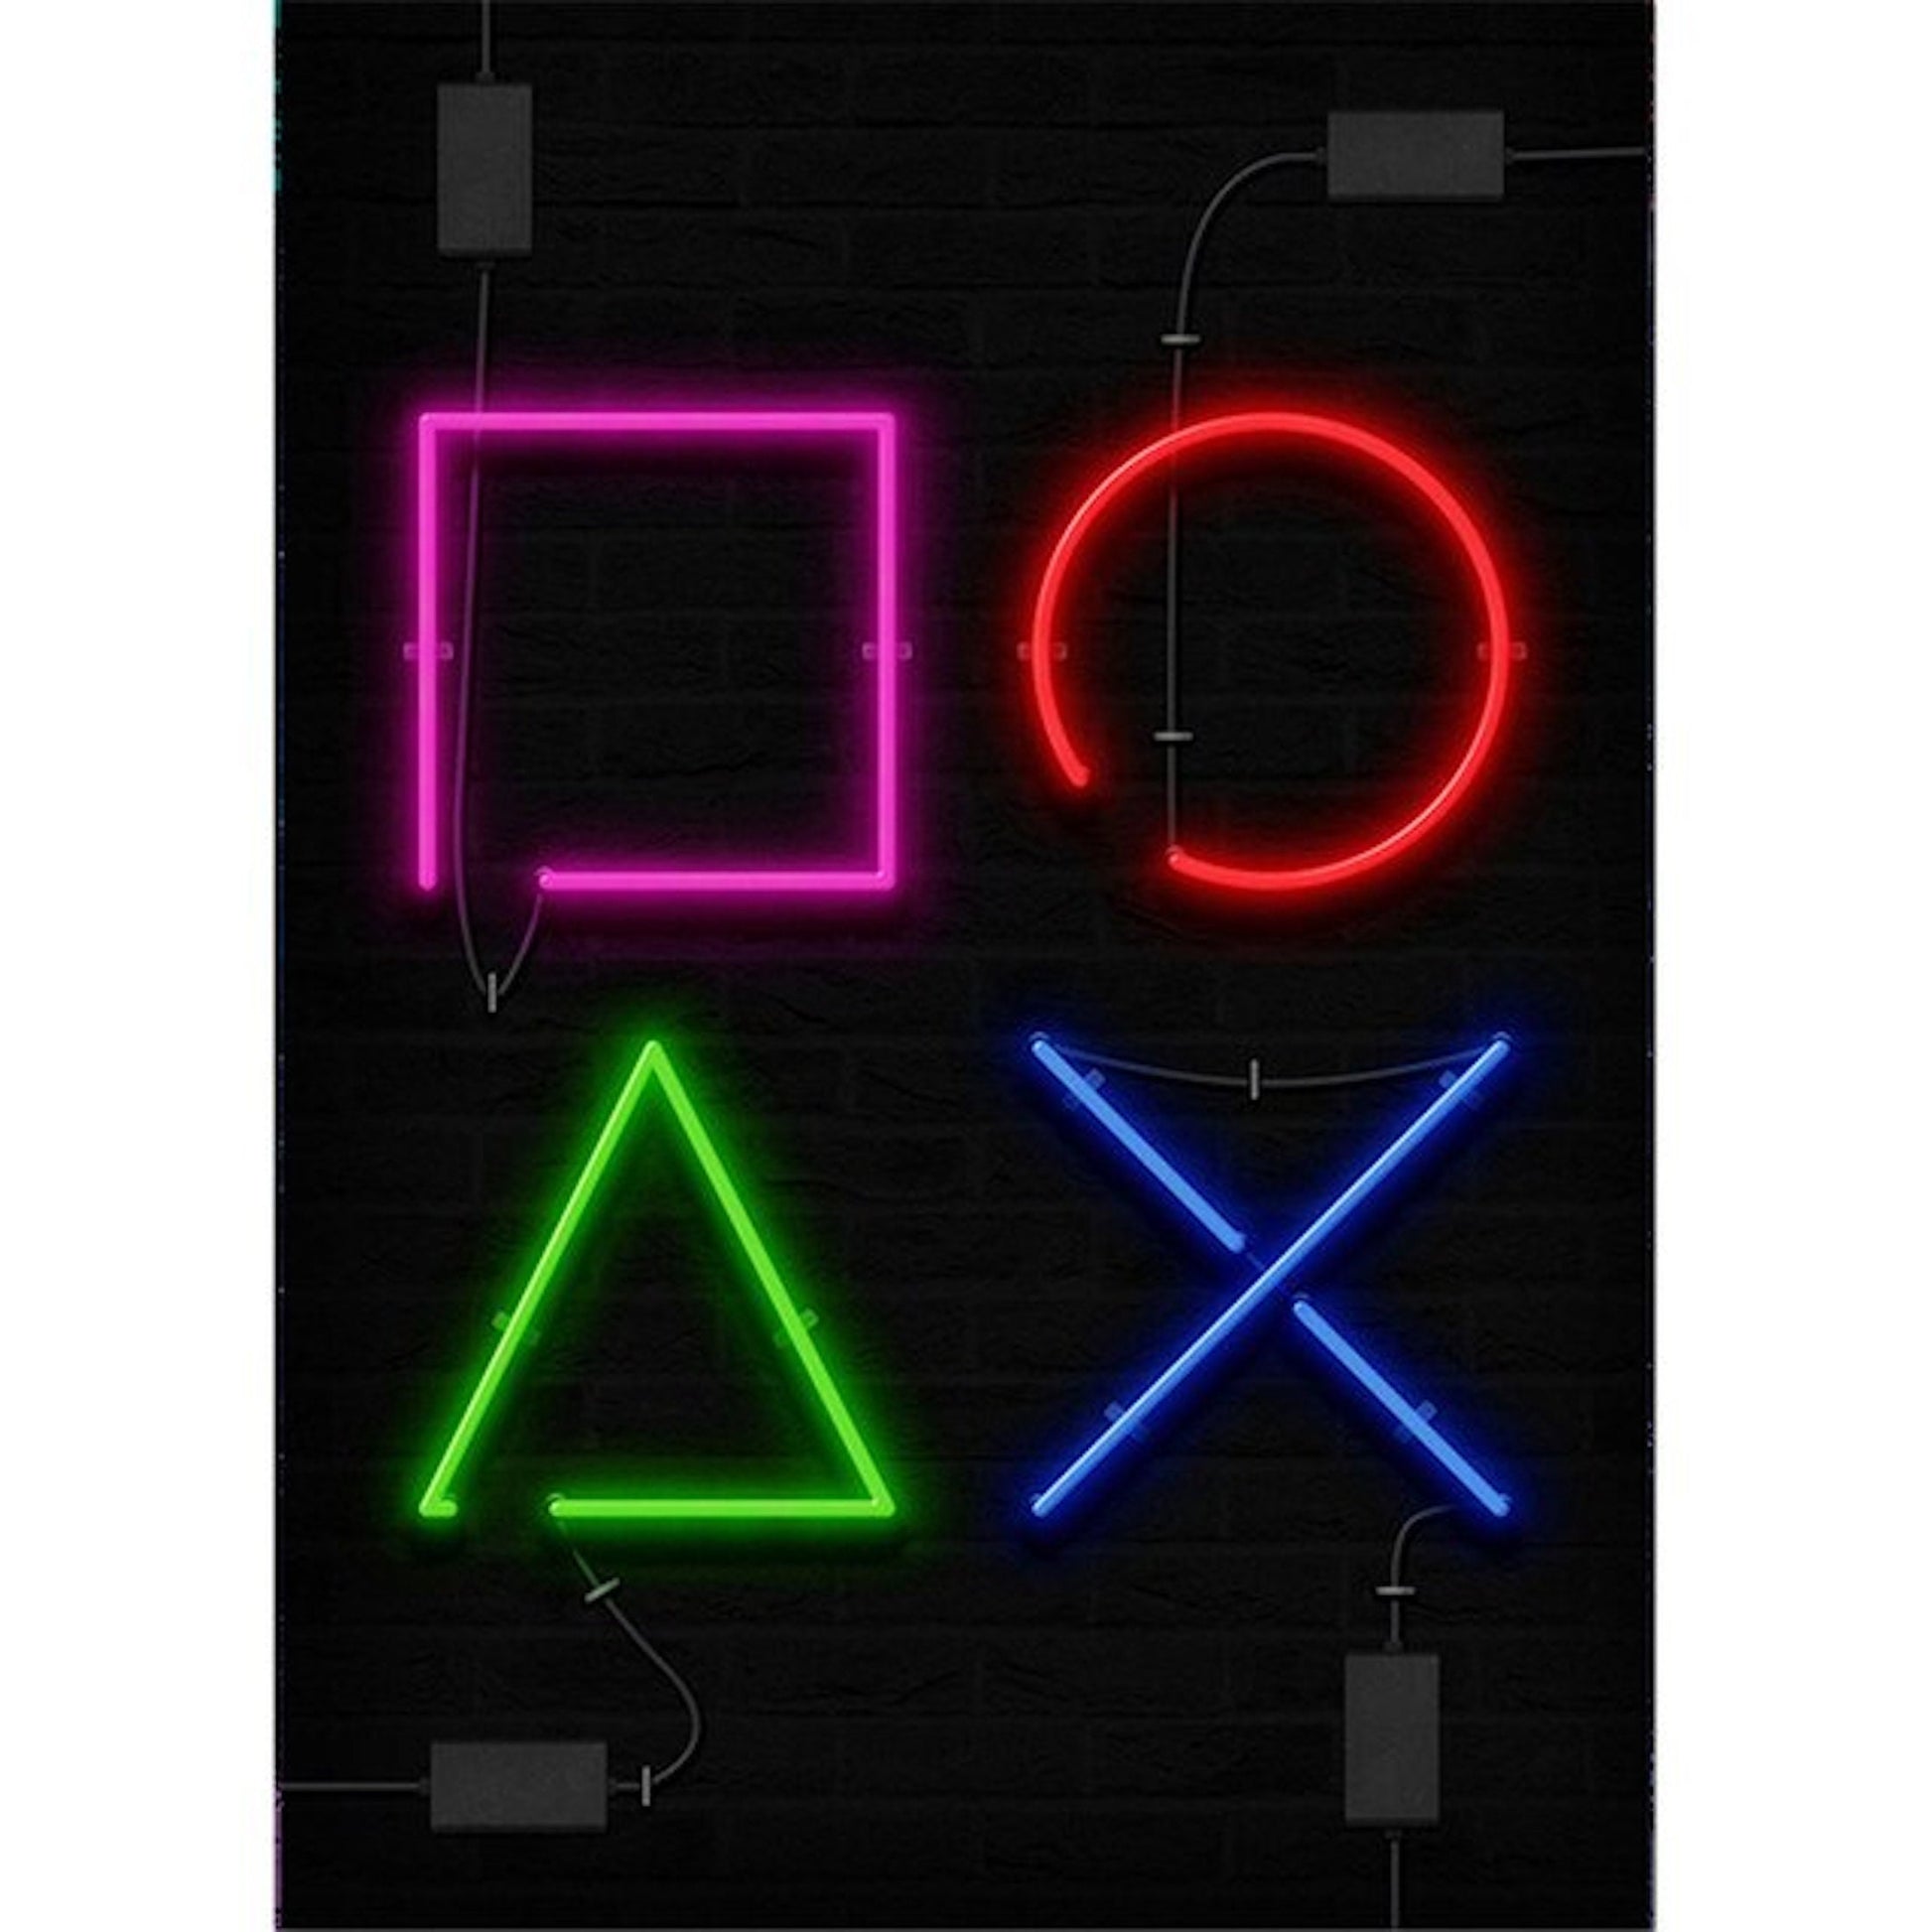 Poster Gamer Playstation cool sayings in neon colors as a decorative print  without a frame